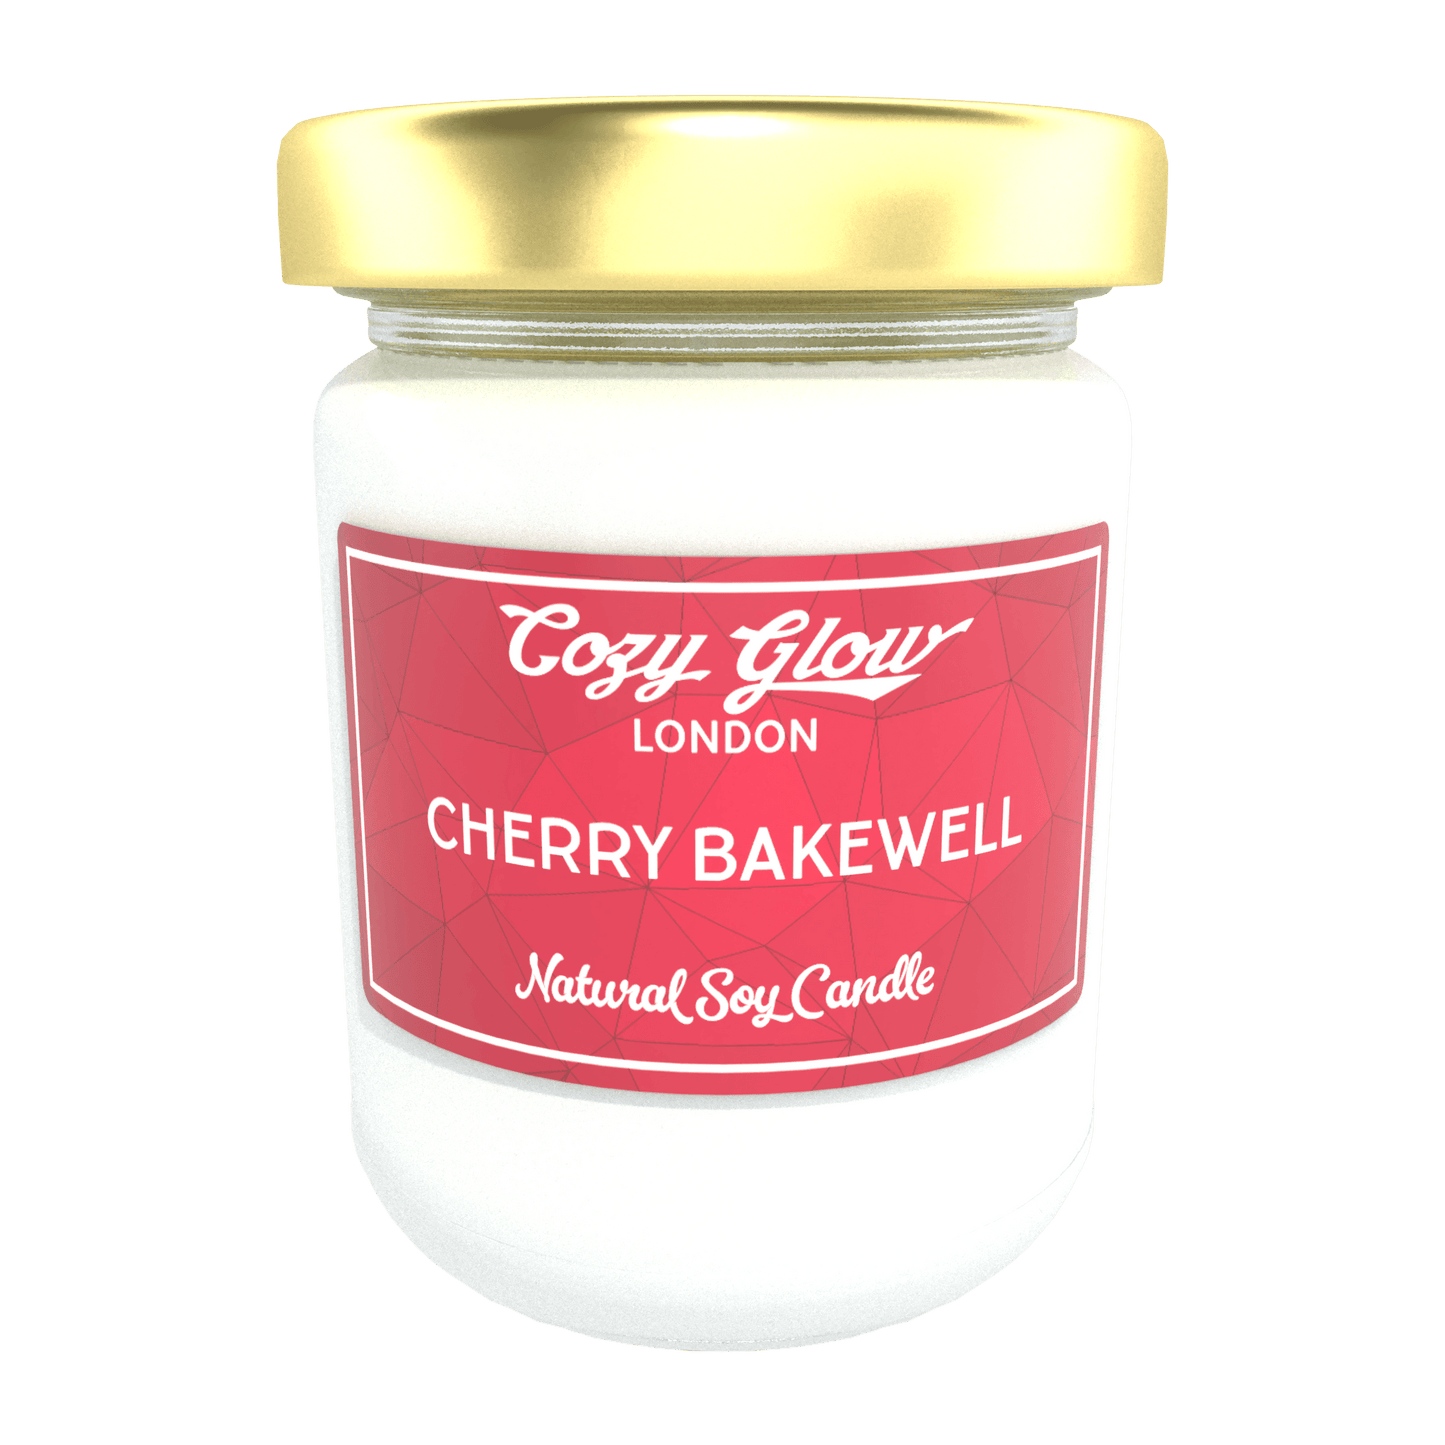 Cozy Glow Cherry Bakewell Large Soy Candle